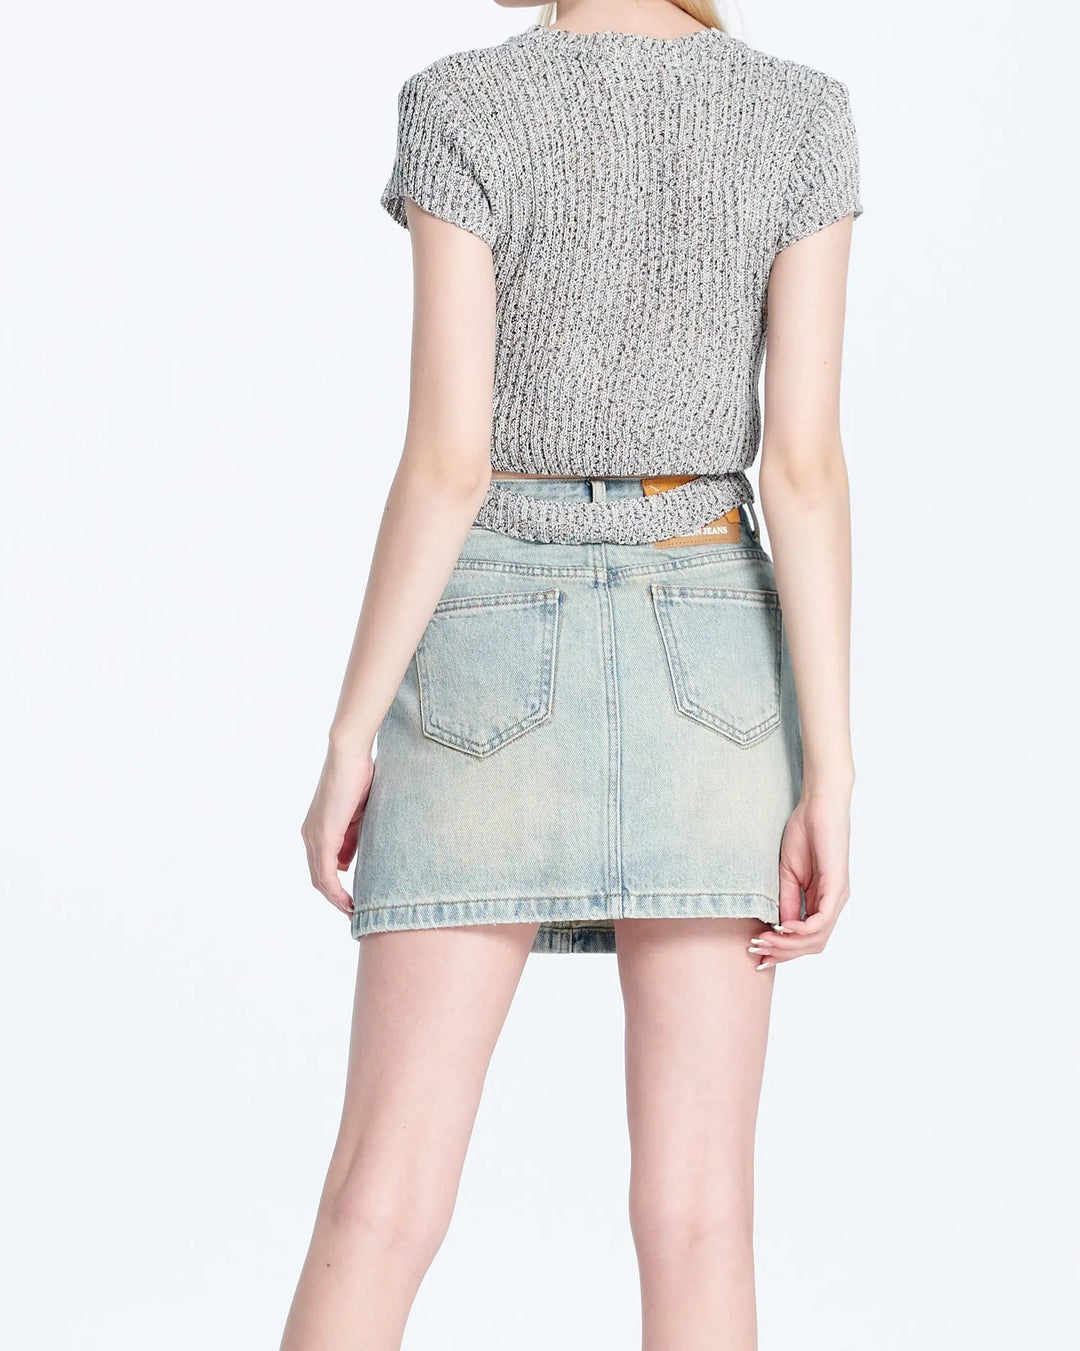 An image of a   C2000H Knit Top With Cut-Out Back by  Mirra Masa